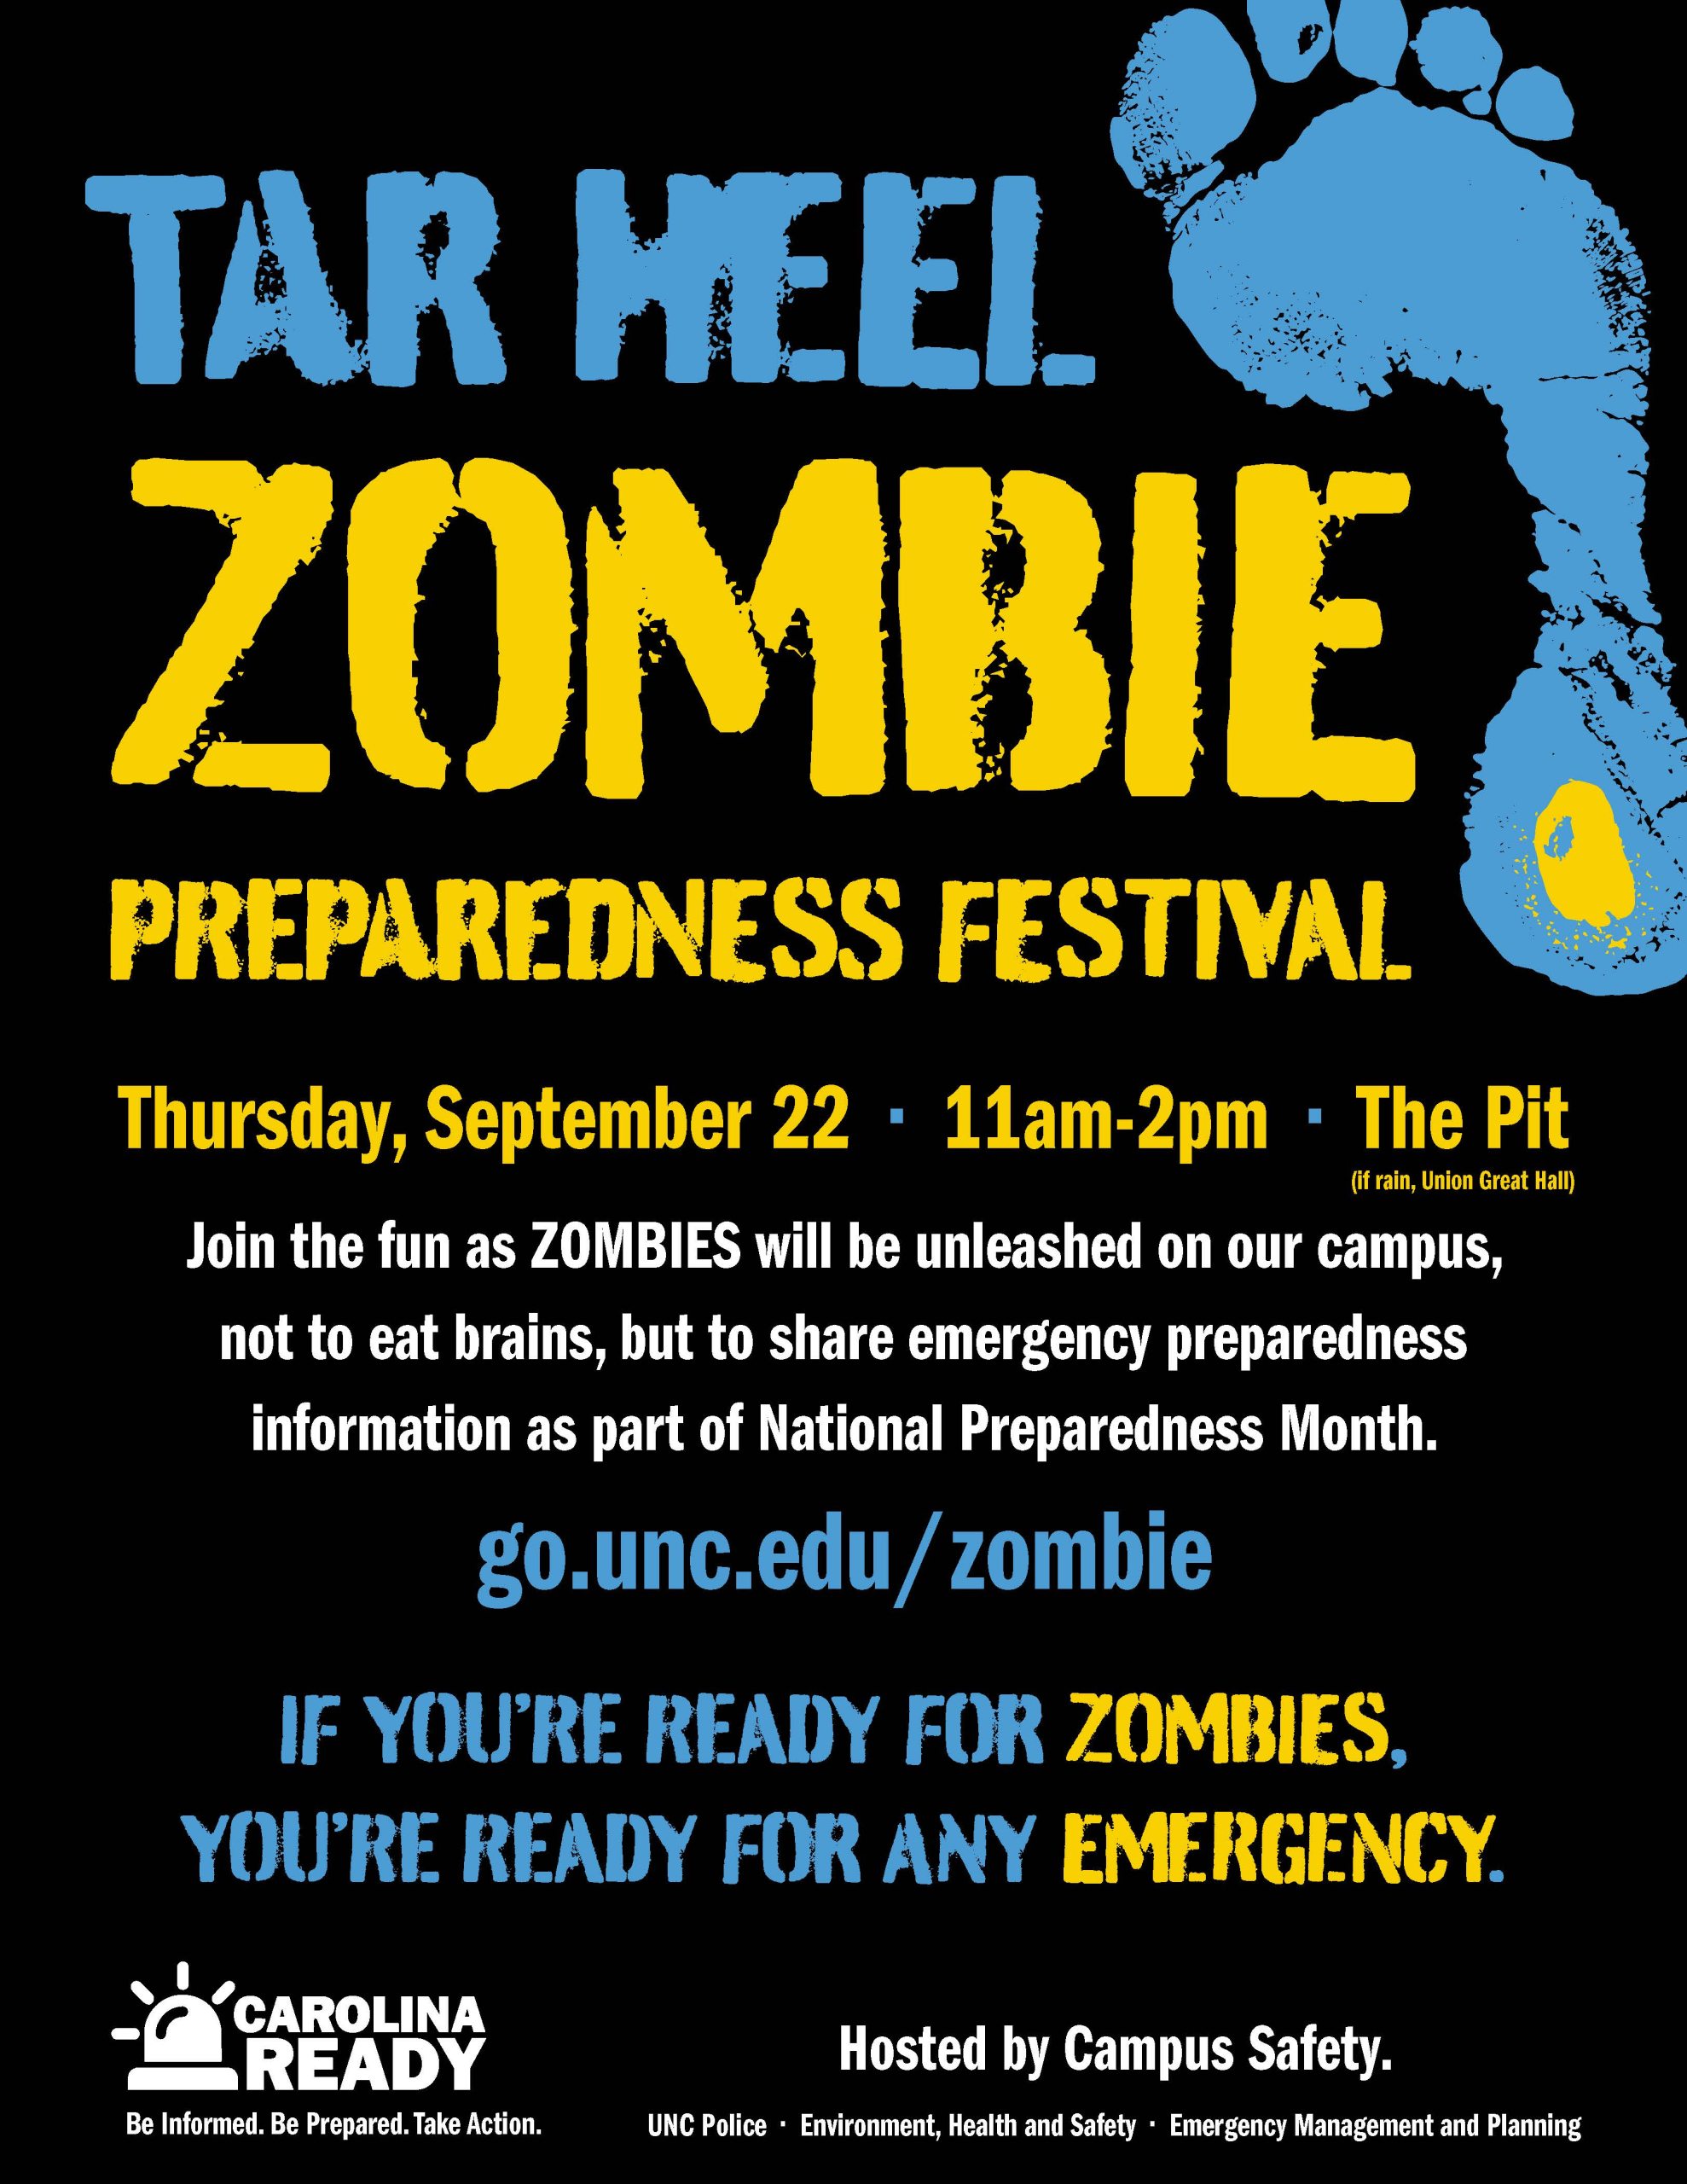 Tar Heel Zombie Preparedness Festival Thursday, September 22 • 11am-2pm • The Pit Join the fun as ZOMBIES will be unleashed on our campus, not to eat brains, but to share emergency preparedness information as part of National Preparedness Month. go.unc.edu/zombie IF YOU’RE READY FOR ZOMBIES, YOU’RE READY FOR ANY EMERGENCY. Hosted by Campus Safety. UNC Police • Environment, Health and Safety • Emergency Management and Planning Be Informed. Be Prepared. Take Action.